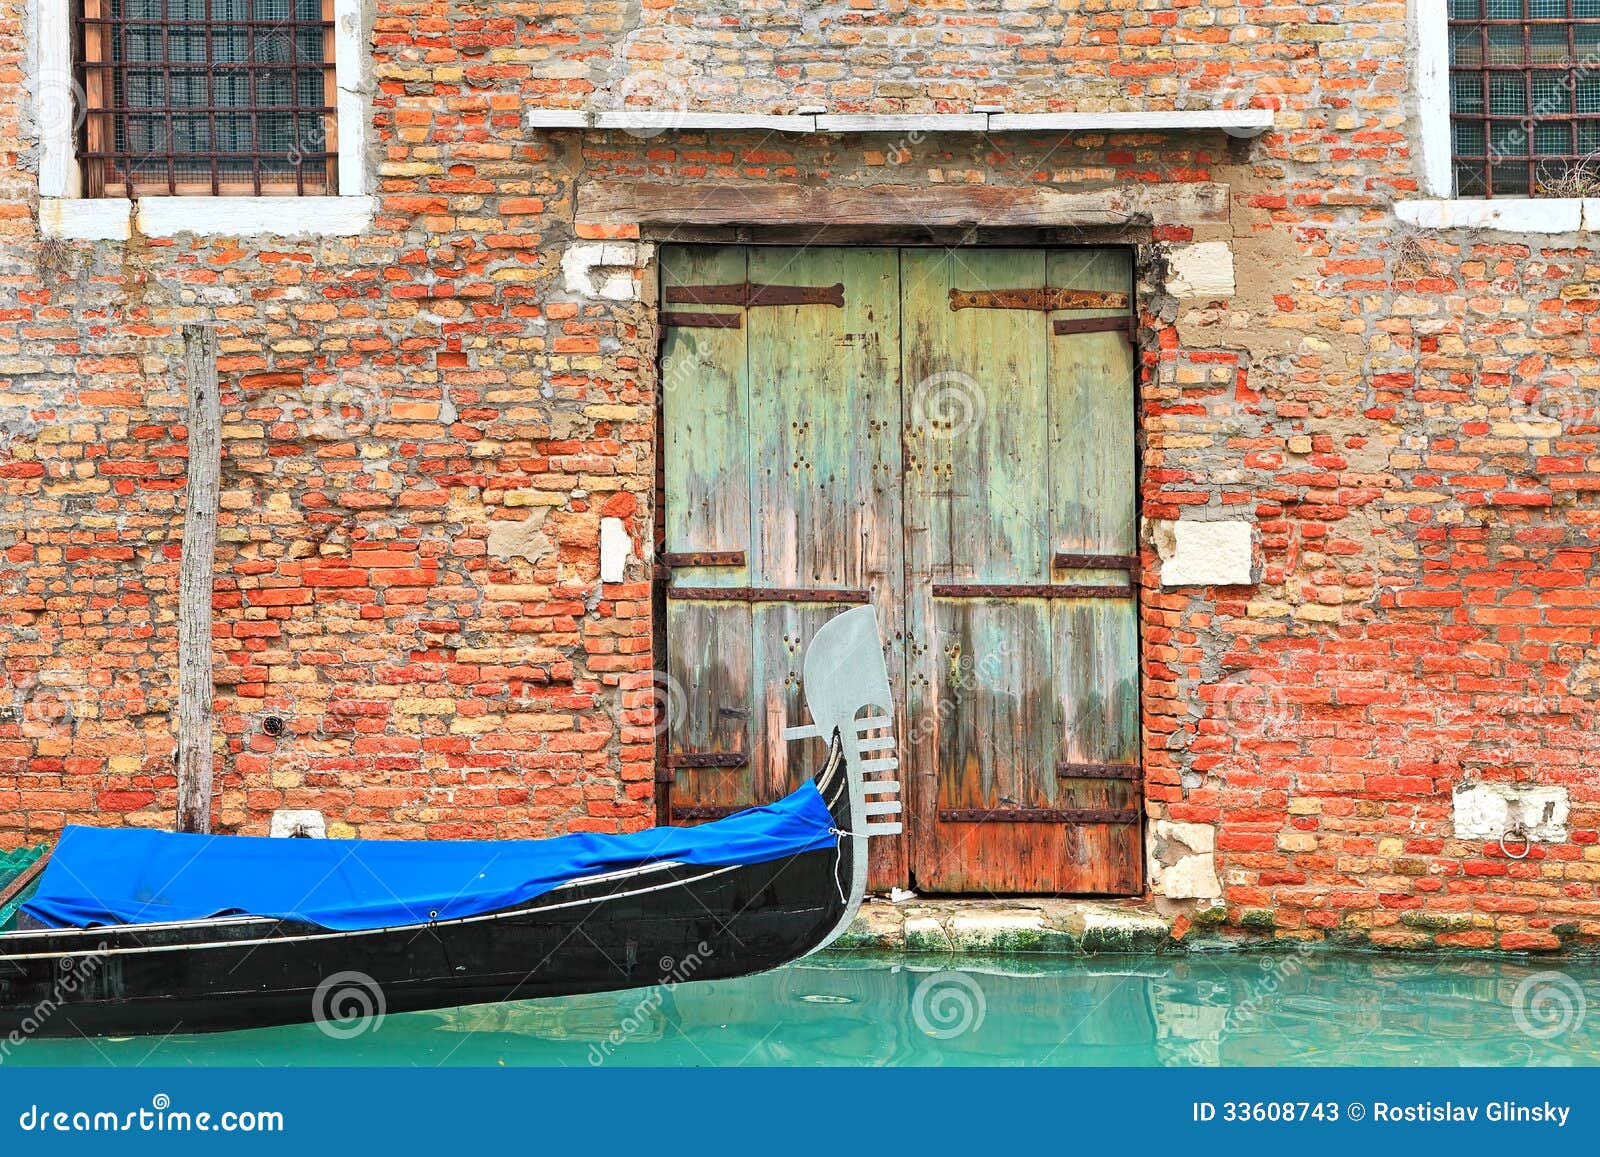 Gondola On Canal And Old Brick House In Venice, Italy 